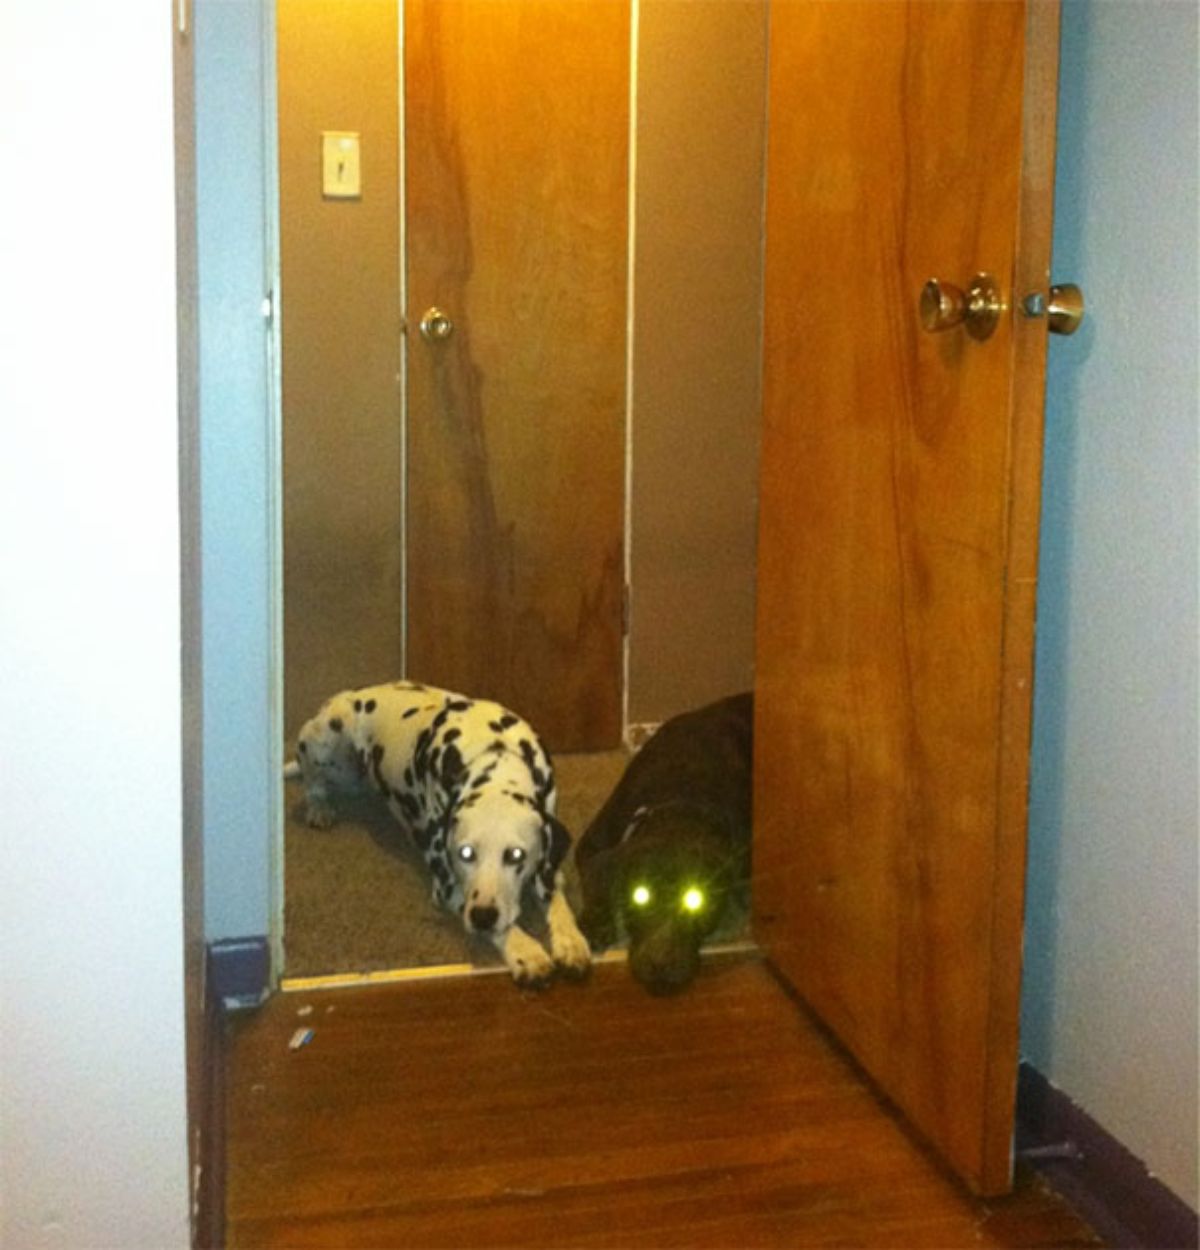 dalmation and a black dog lying down on a hallway with their paws and nose in the wooden floor of the next room